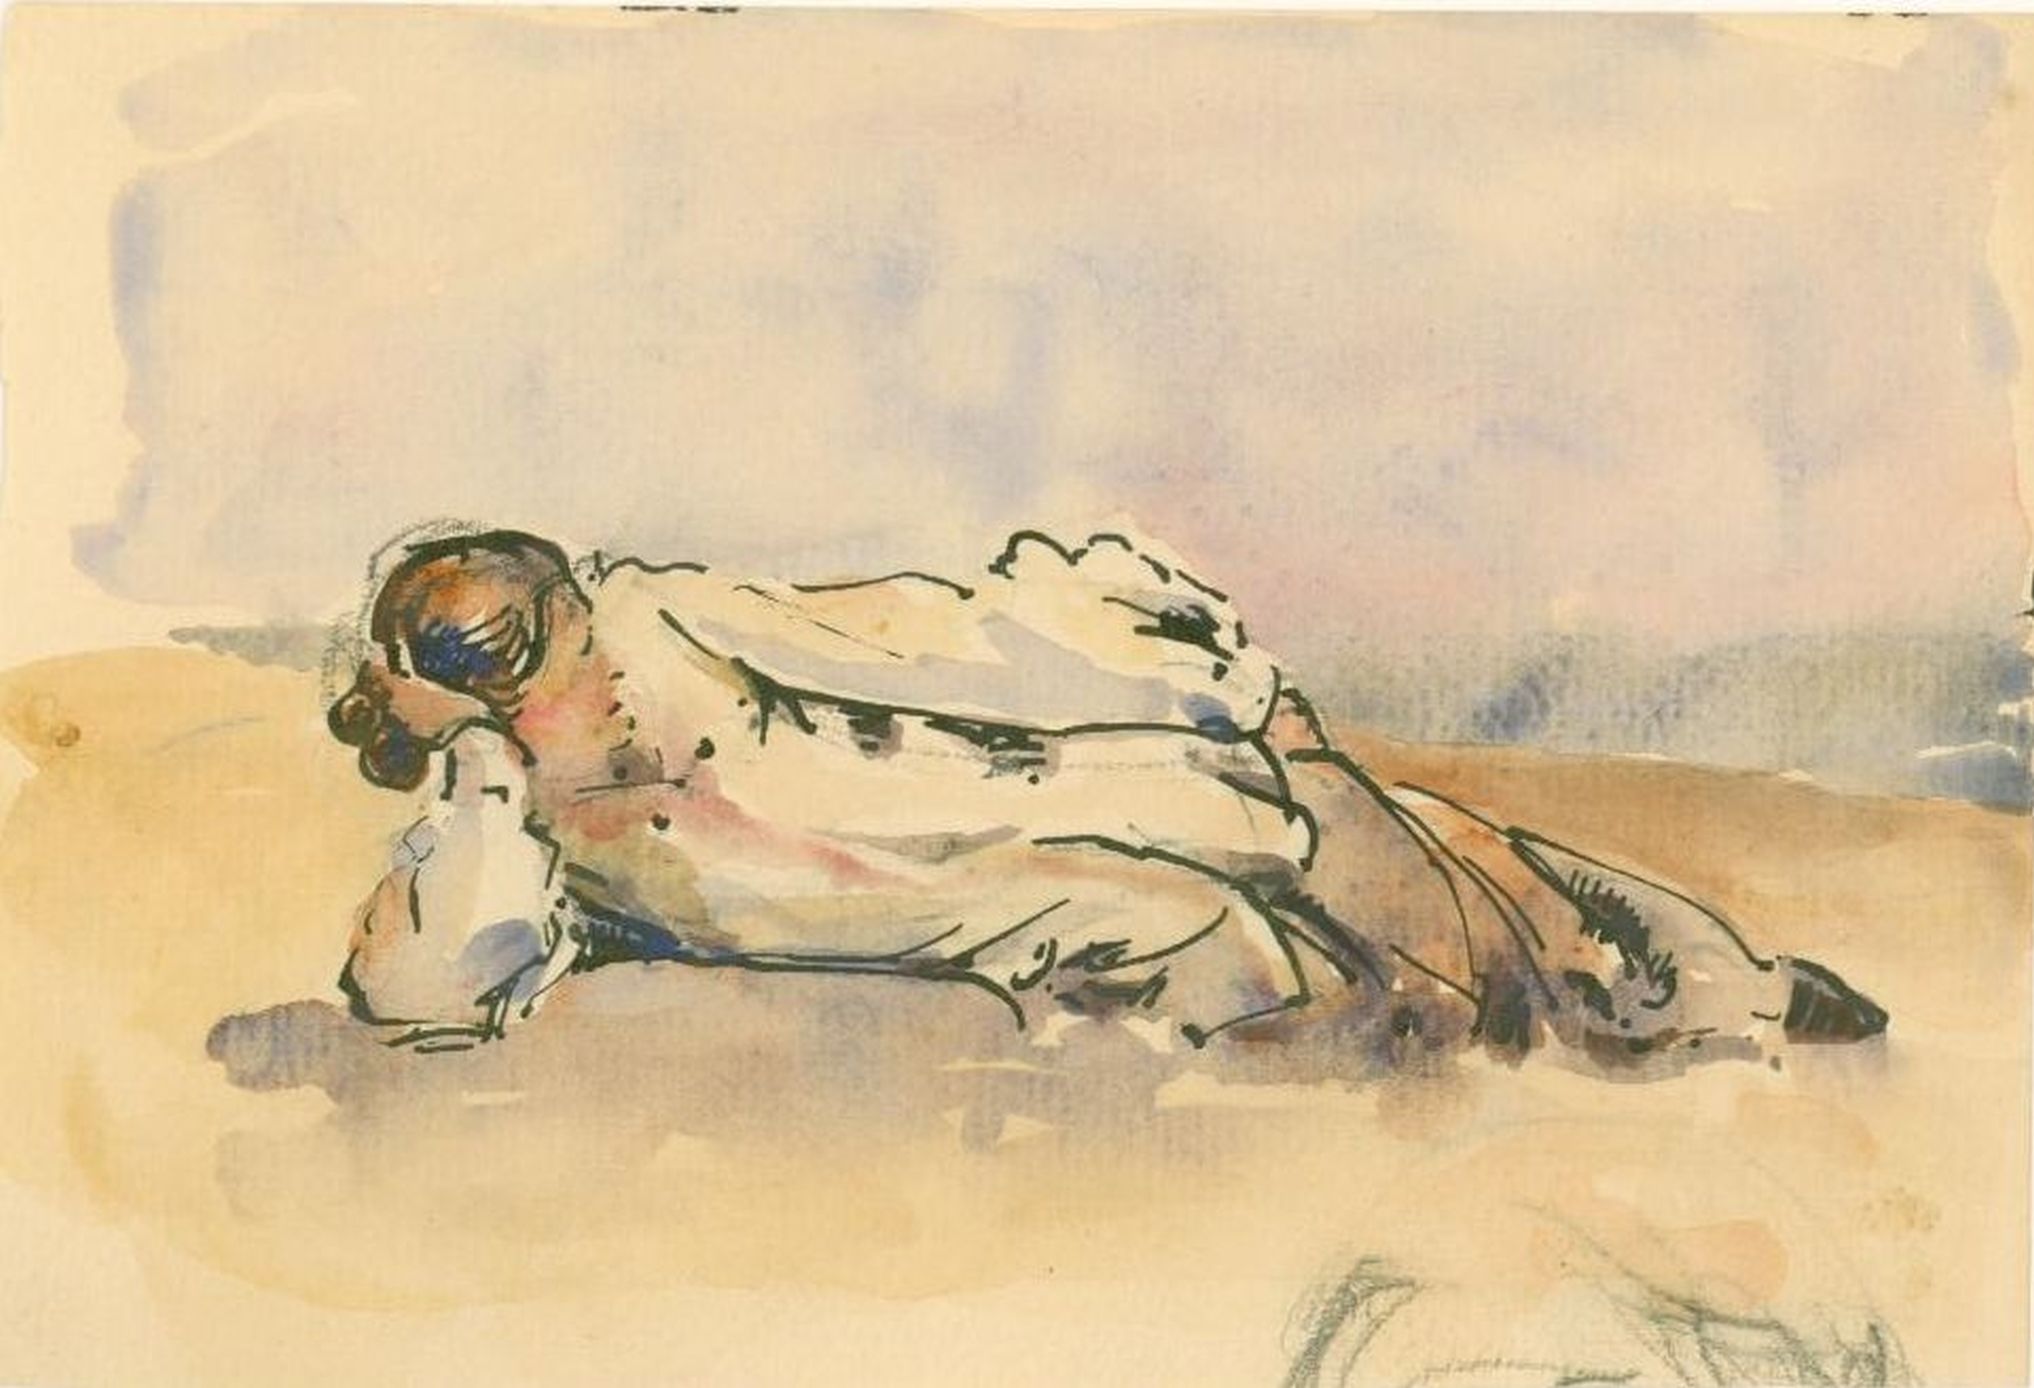 Watercolour drawing showing a woman lying in the sand